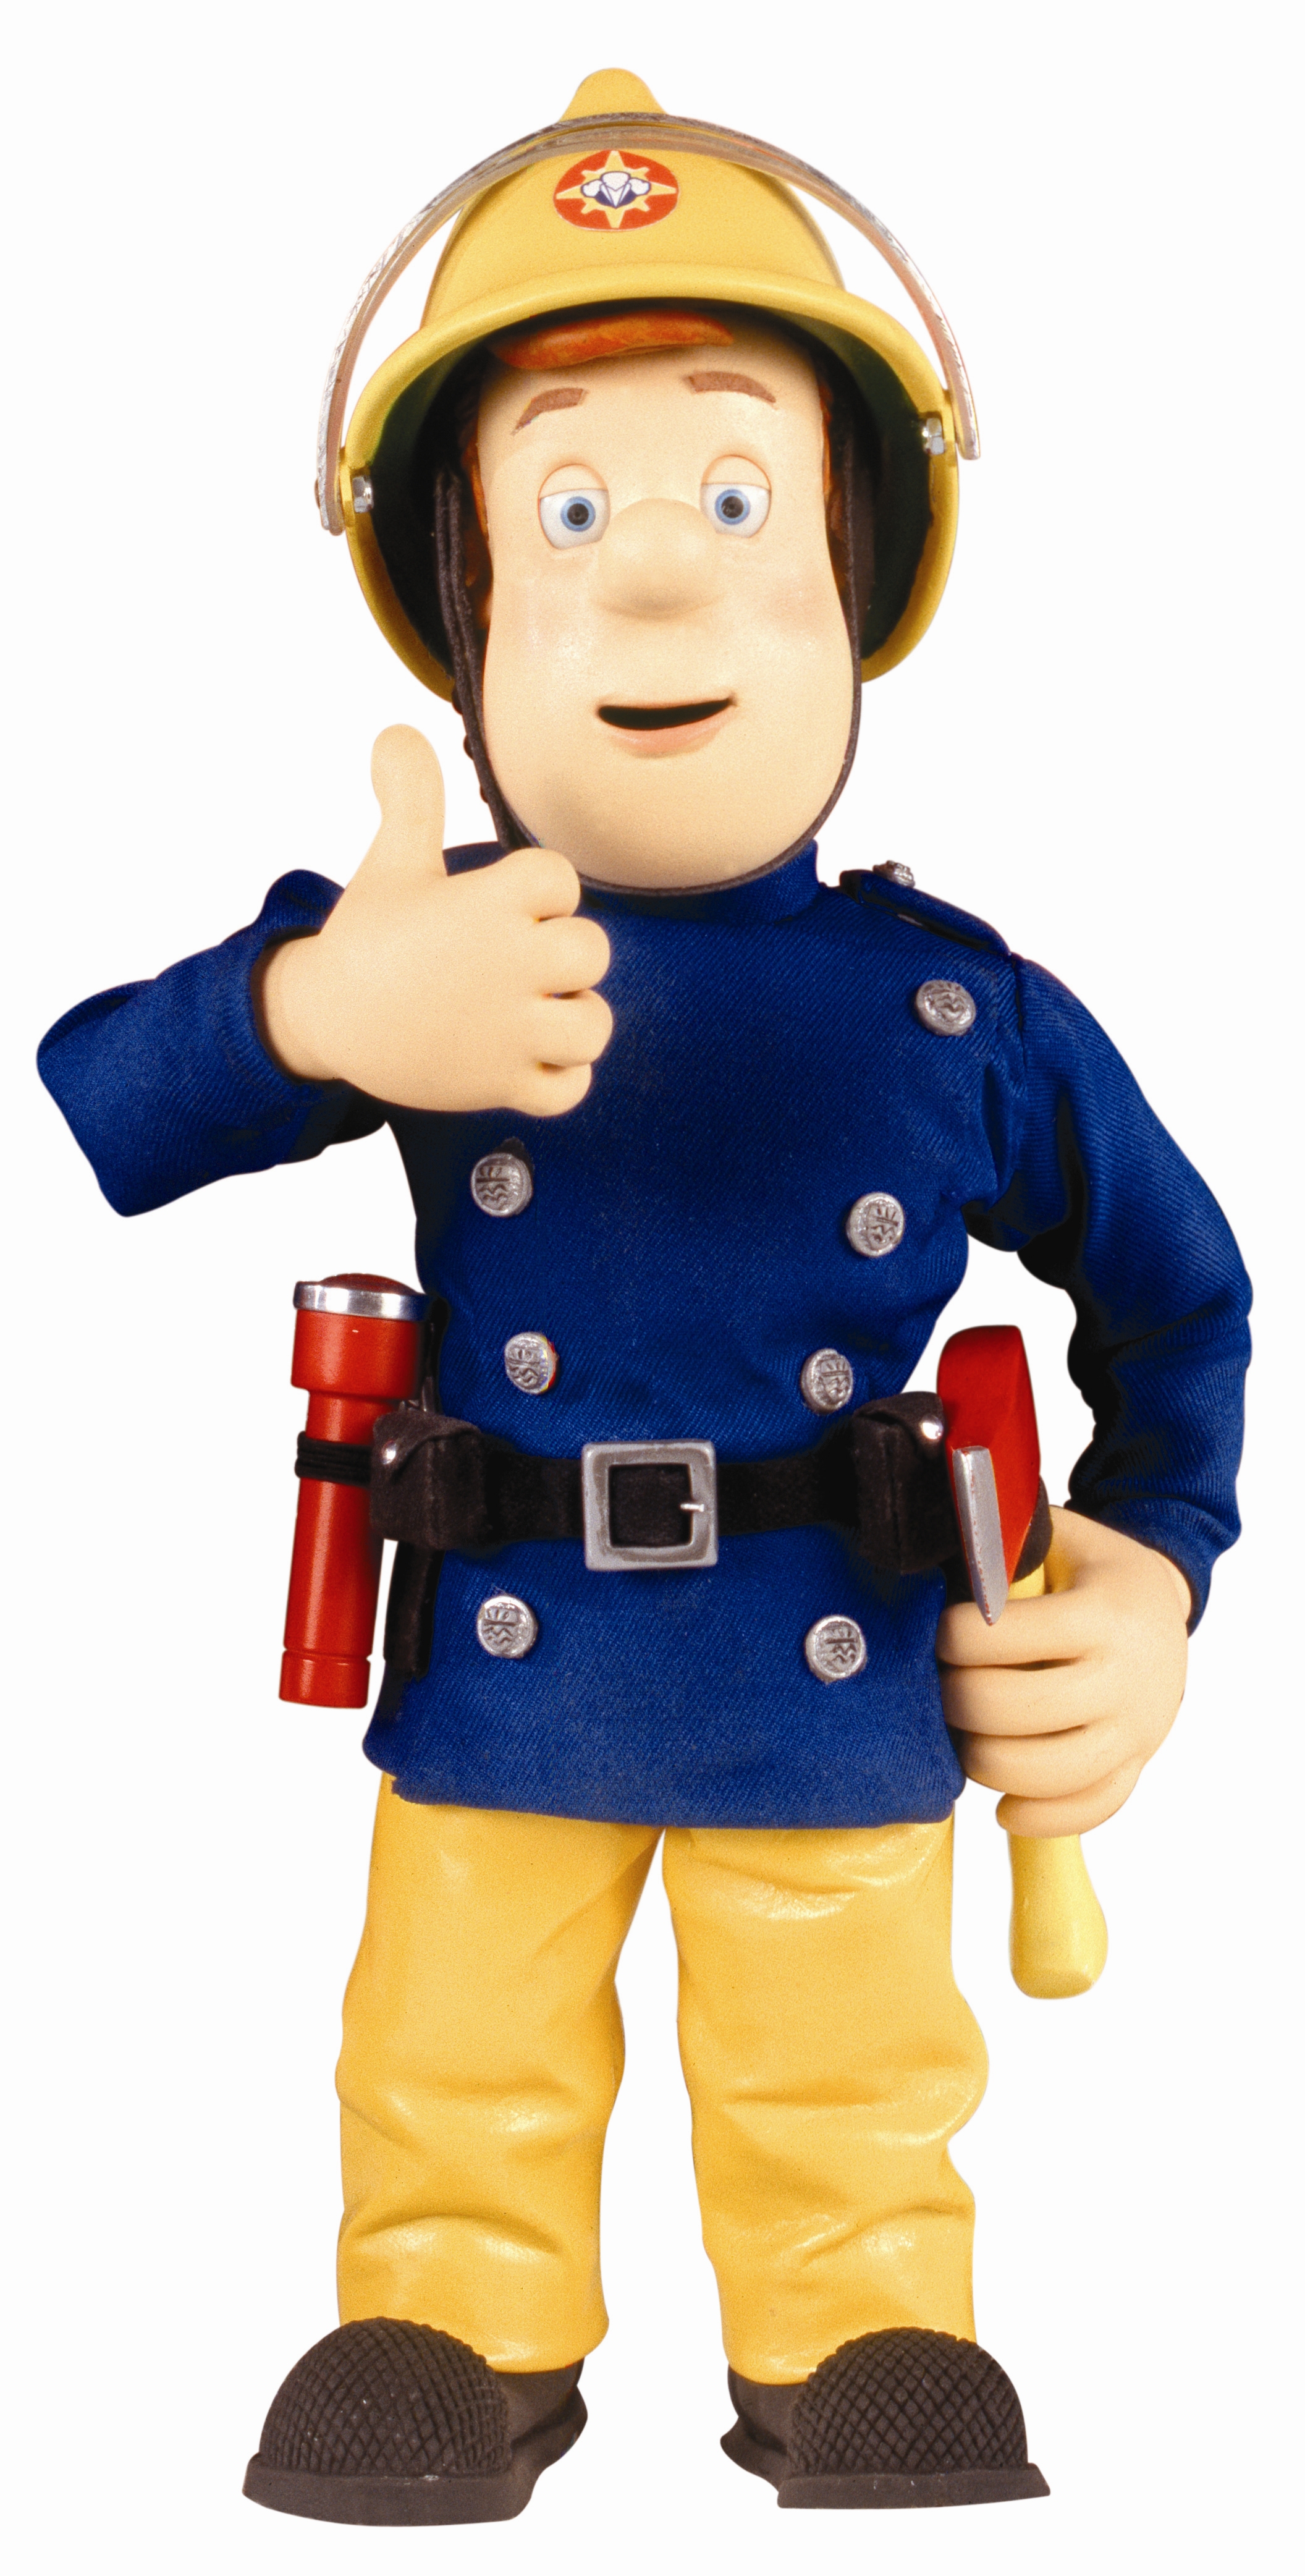 The Customer Ordered A Vanilla Flavoured Fireman Sam Cake And Asked